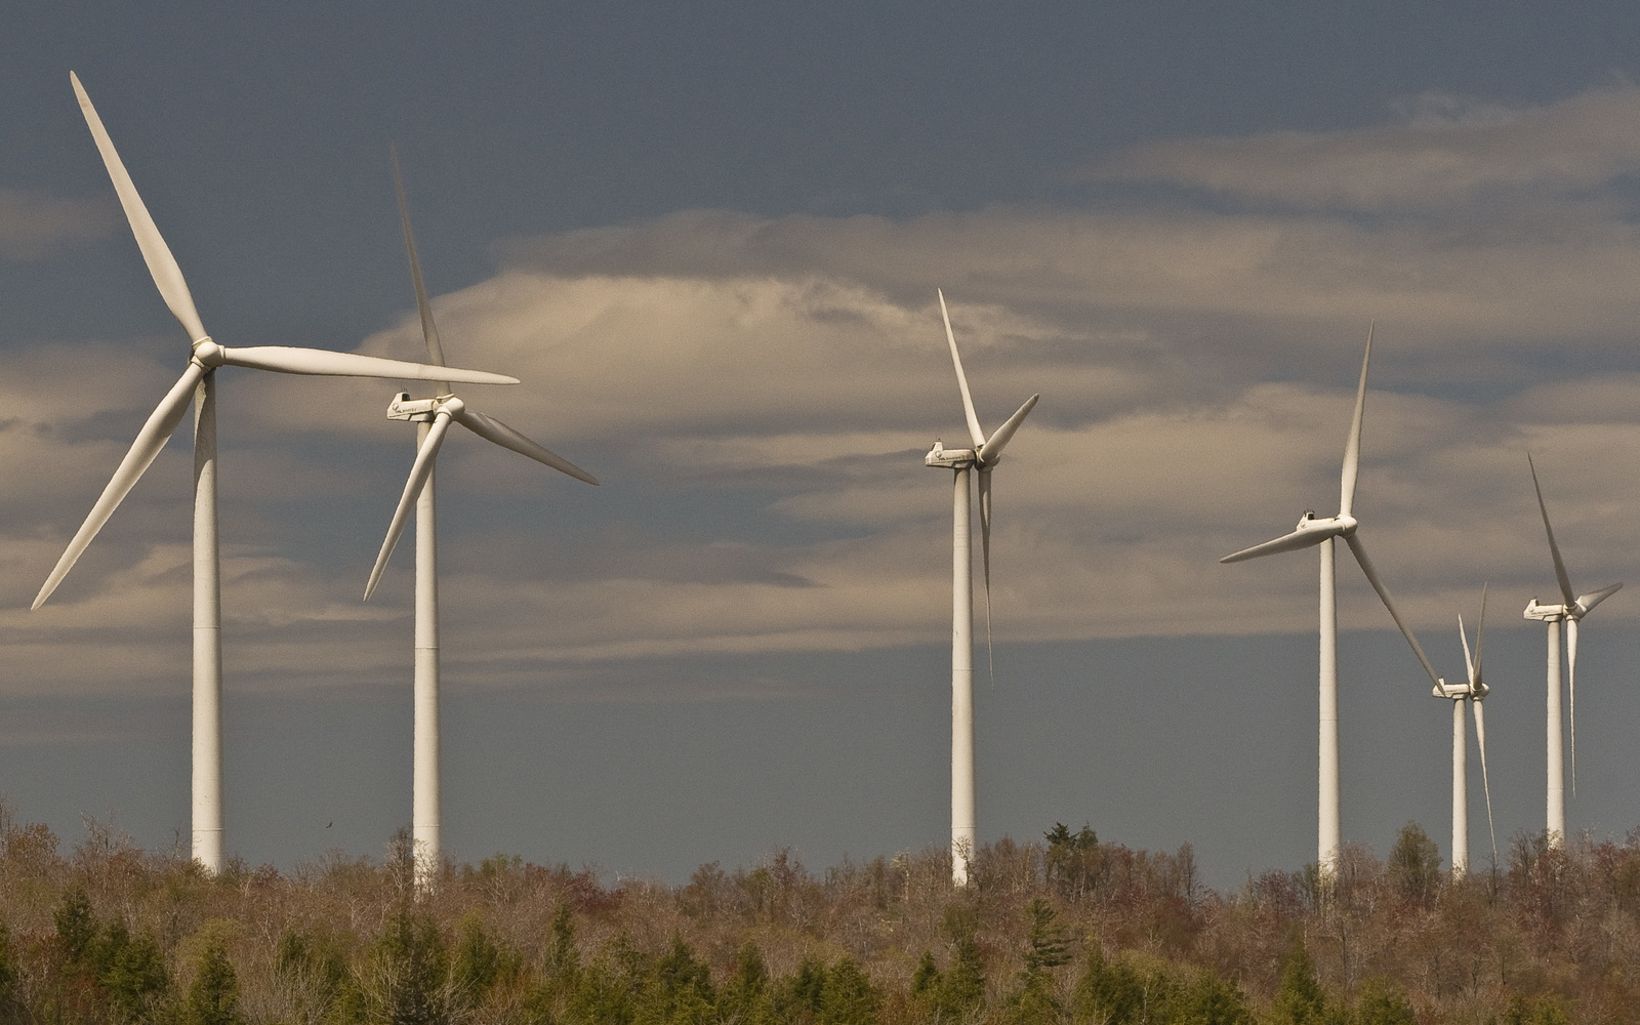 A line of wind turbines under a blue sky with billowing white clouds.